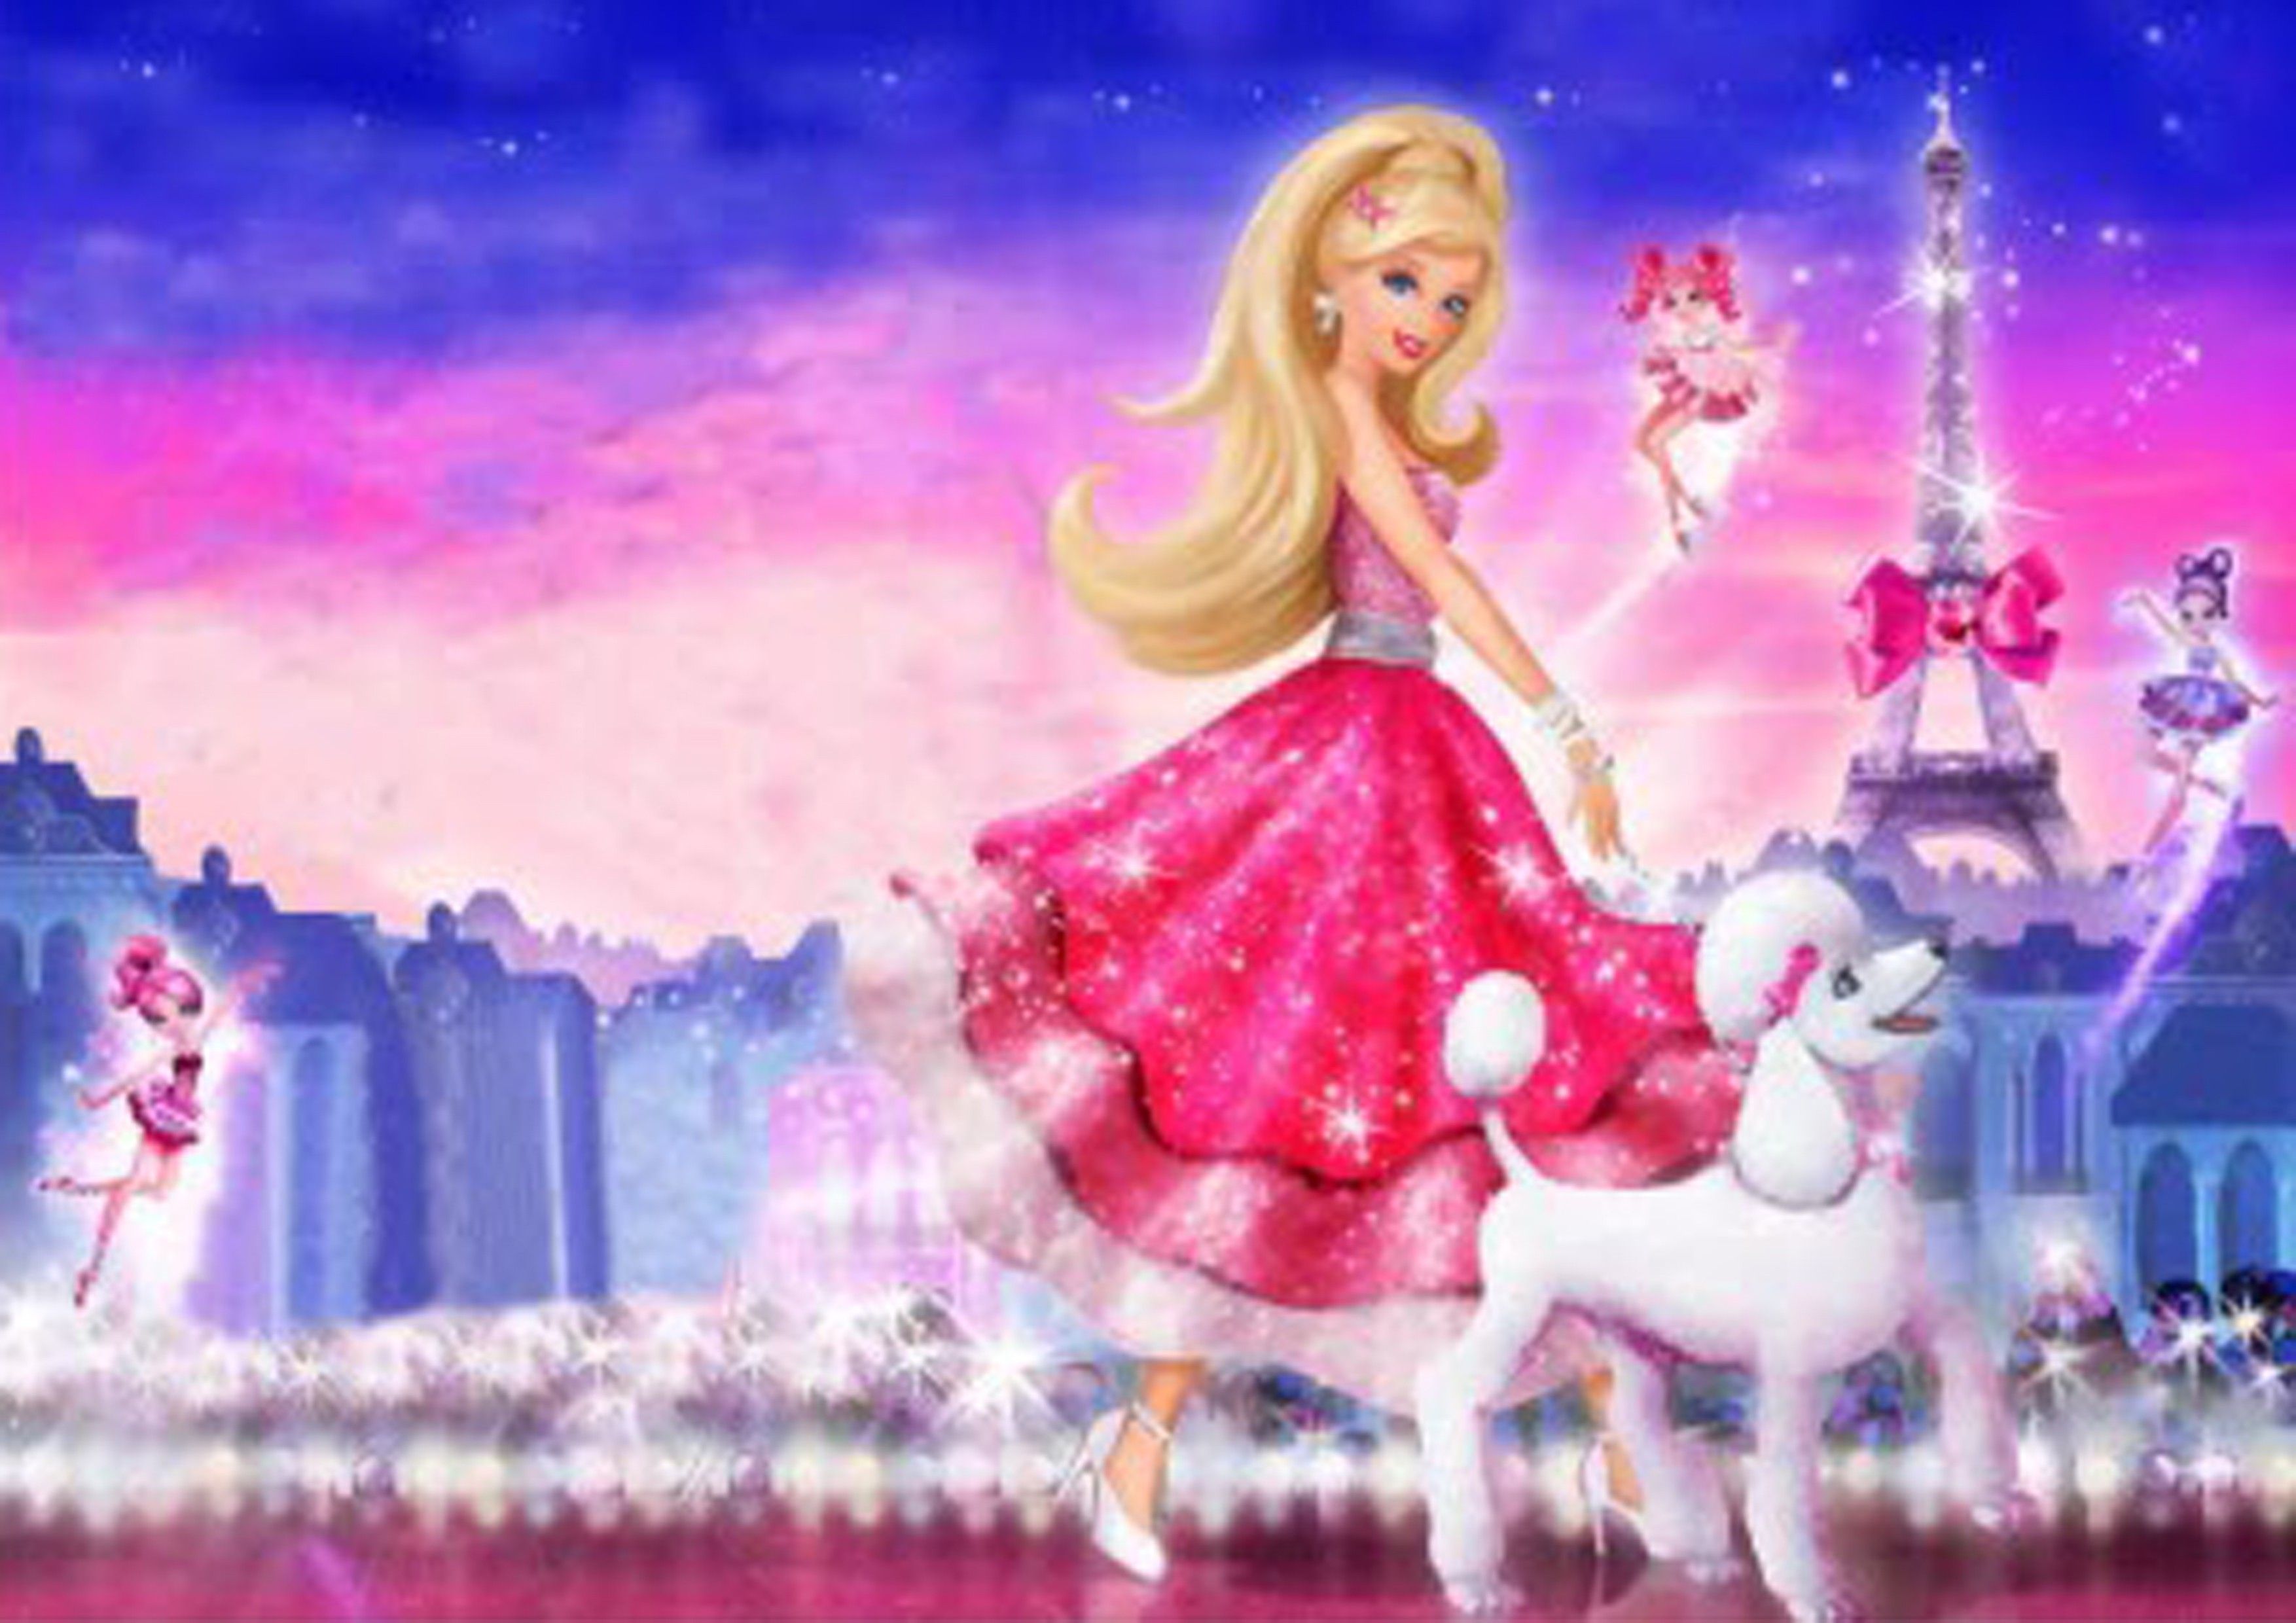 Gallery for - barbie wallpaper background